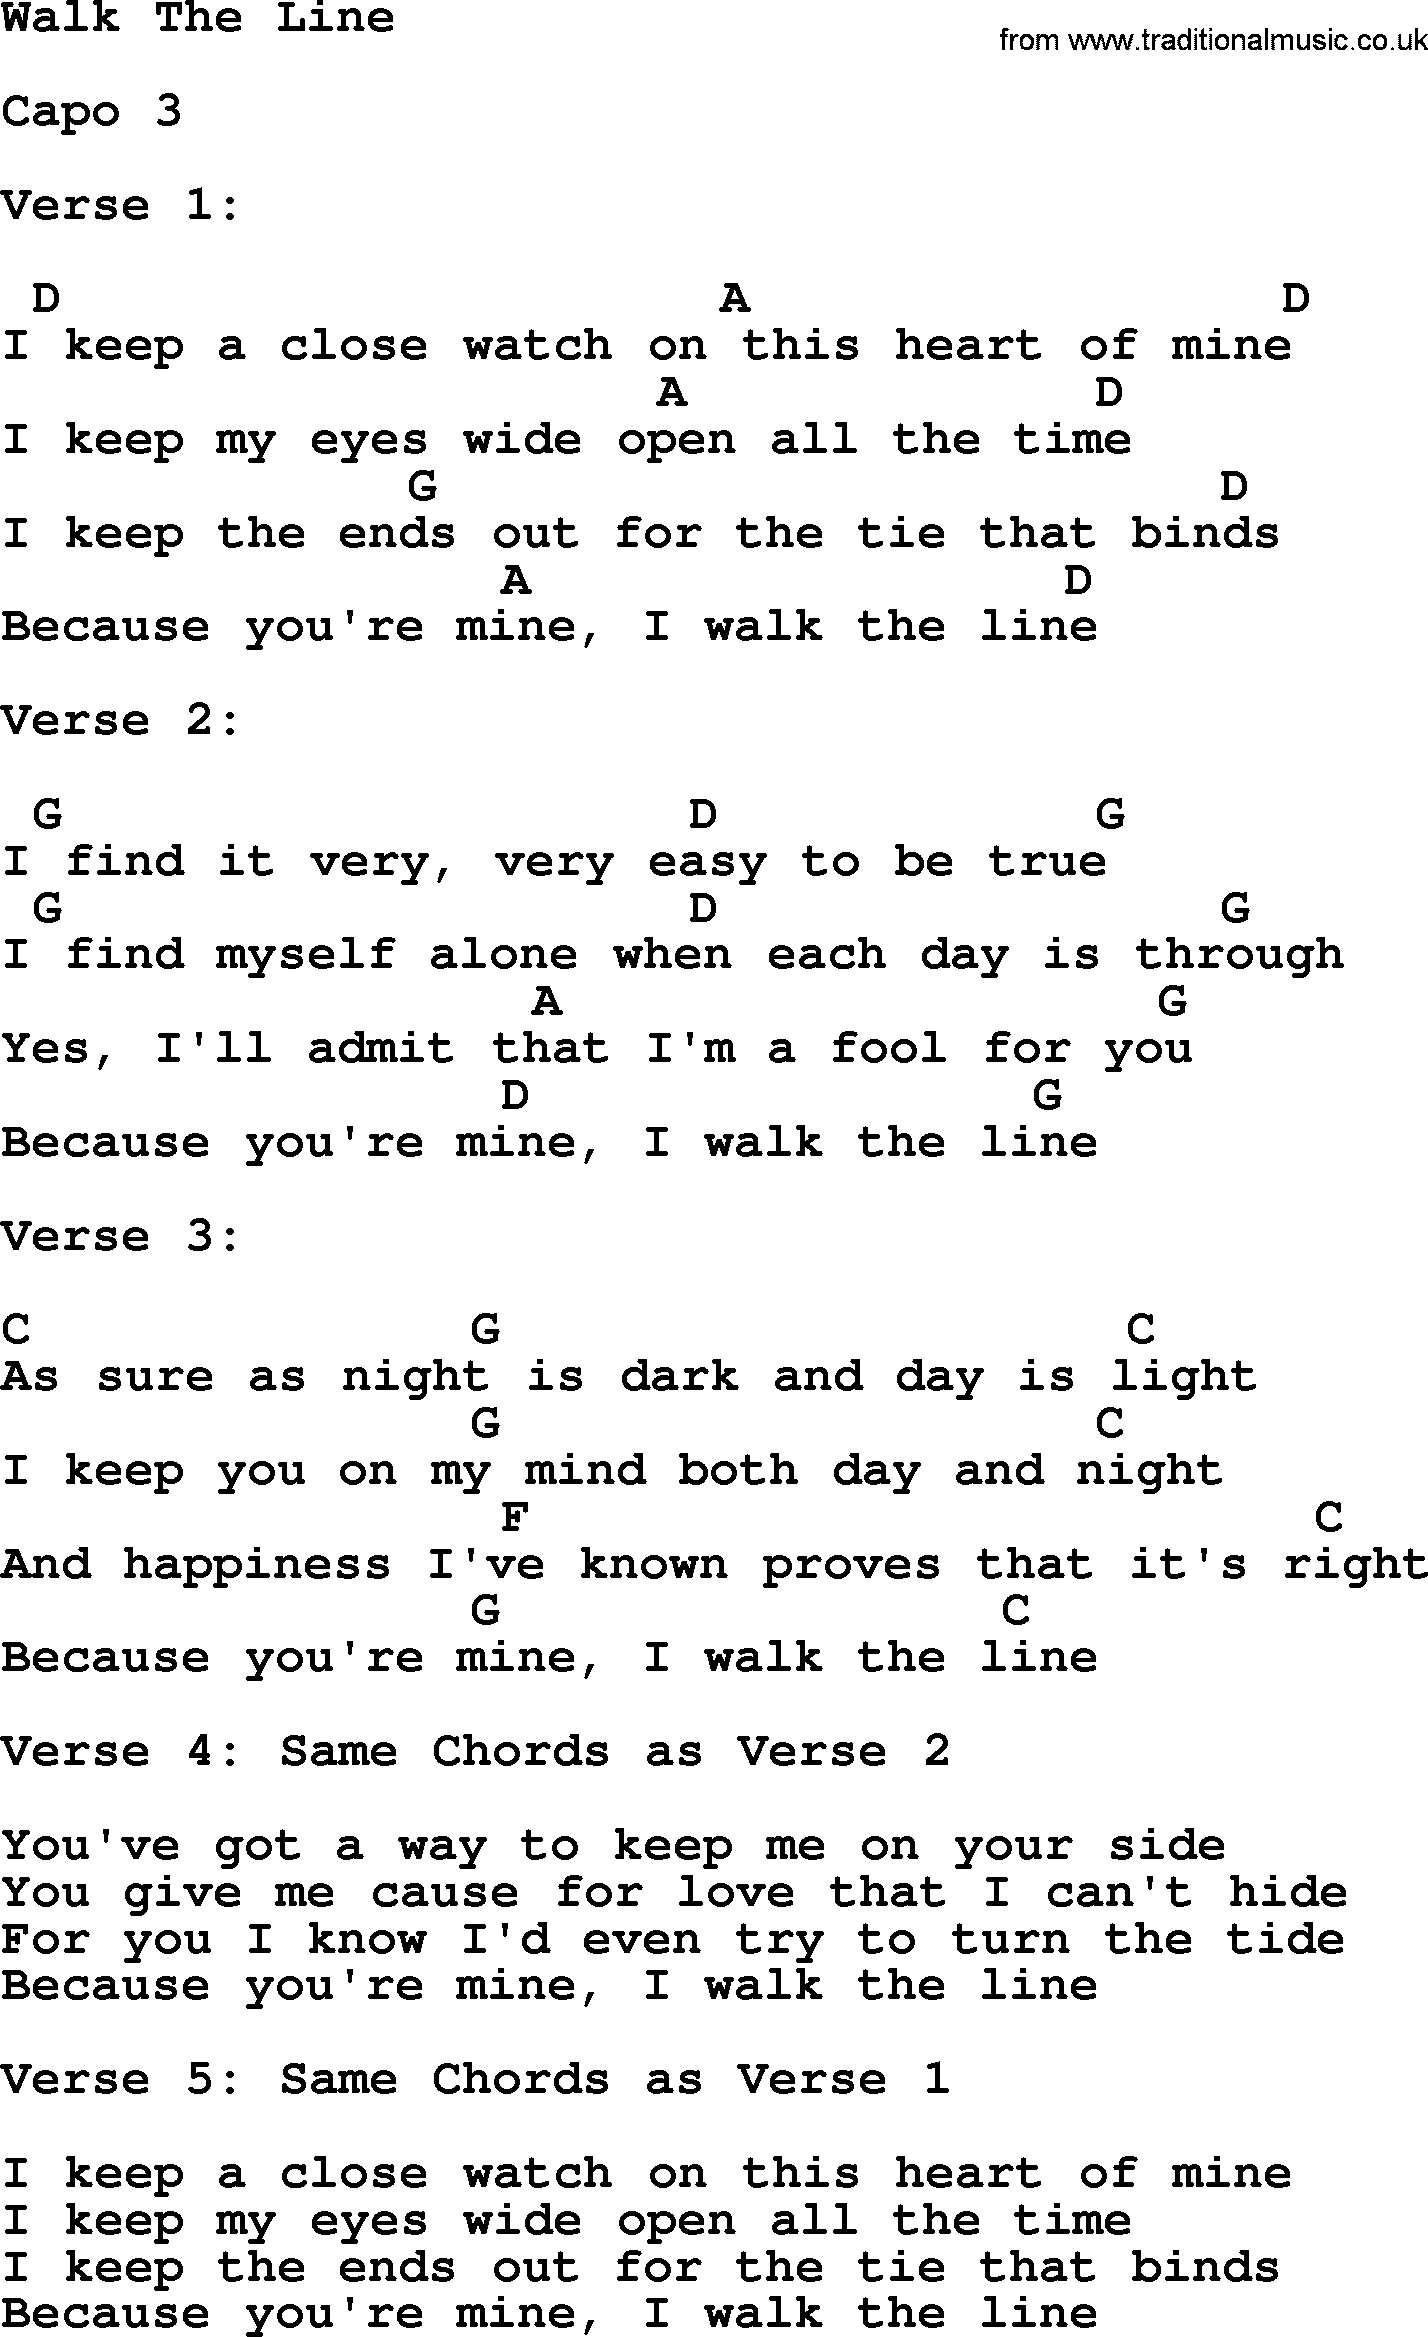 Johnny Cash song Walk The Line, lyrics and chords